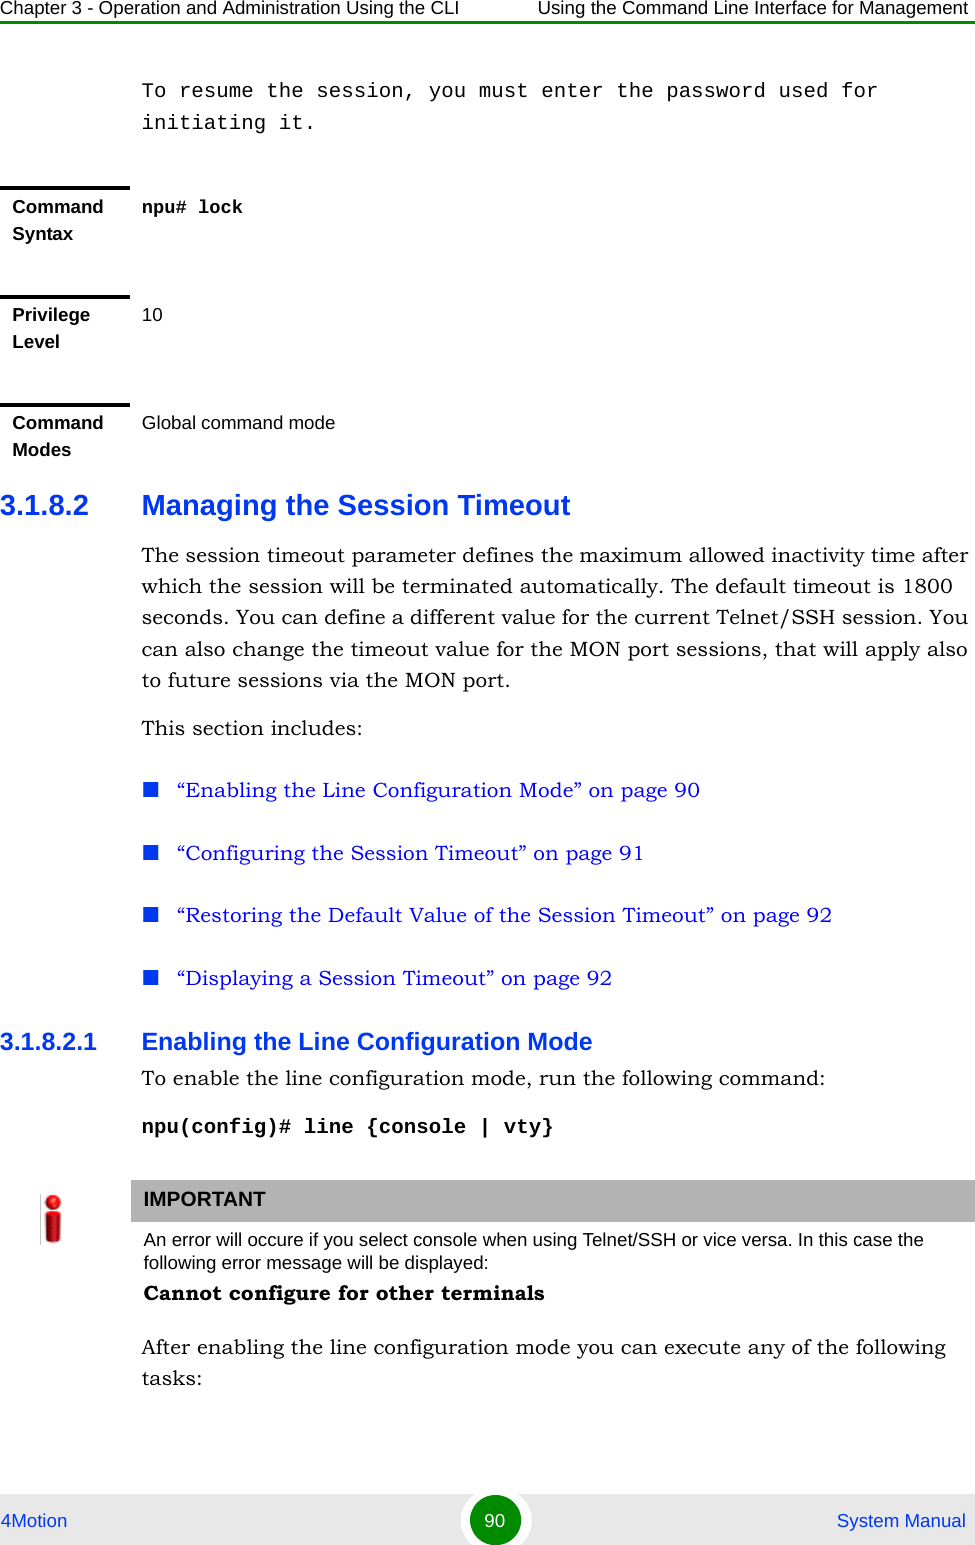 Chapter 3 - Operation and Administration Using the CLI Using the Command Line Interface for Management4Motion 90  System ManualTo resume the session, you must enter the password used for initiating it.3.1.8.2 Managing the Session TimeoutThe session timeout parameter defines the maximum allowed inactivity time after which the session will be terminated automatically. The default timeout is 1800 seconds. You can define a different value for the current Telnet/SSH session. You can also change the timeout value for the MON port sessions, that will apply also to future sessions via the MON port.This section includes:“Enabling the Line Configuration Mode” on page 90“Configuring the Session Timeout” on page 91“Restoring the Default Value of the Session Timeout” on page 92“Displaying a Session Timeout” on page 923.1.8.2.1 Enabling the Line Configuration ModeTo enable the line configuration mode, run the following command:npu(config)# line {console | vty}After enabling the line configuration mode you can execute any of the following tasks:Command Syntaxnpu# lockPrivilege Level10Command ModesGlobal command modeIMPORTANTAn error will occure if you select console when using Telnet/SSH or vice versa. In this case the following error message will be displayed:Cannot configure for other terminals